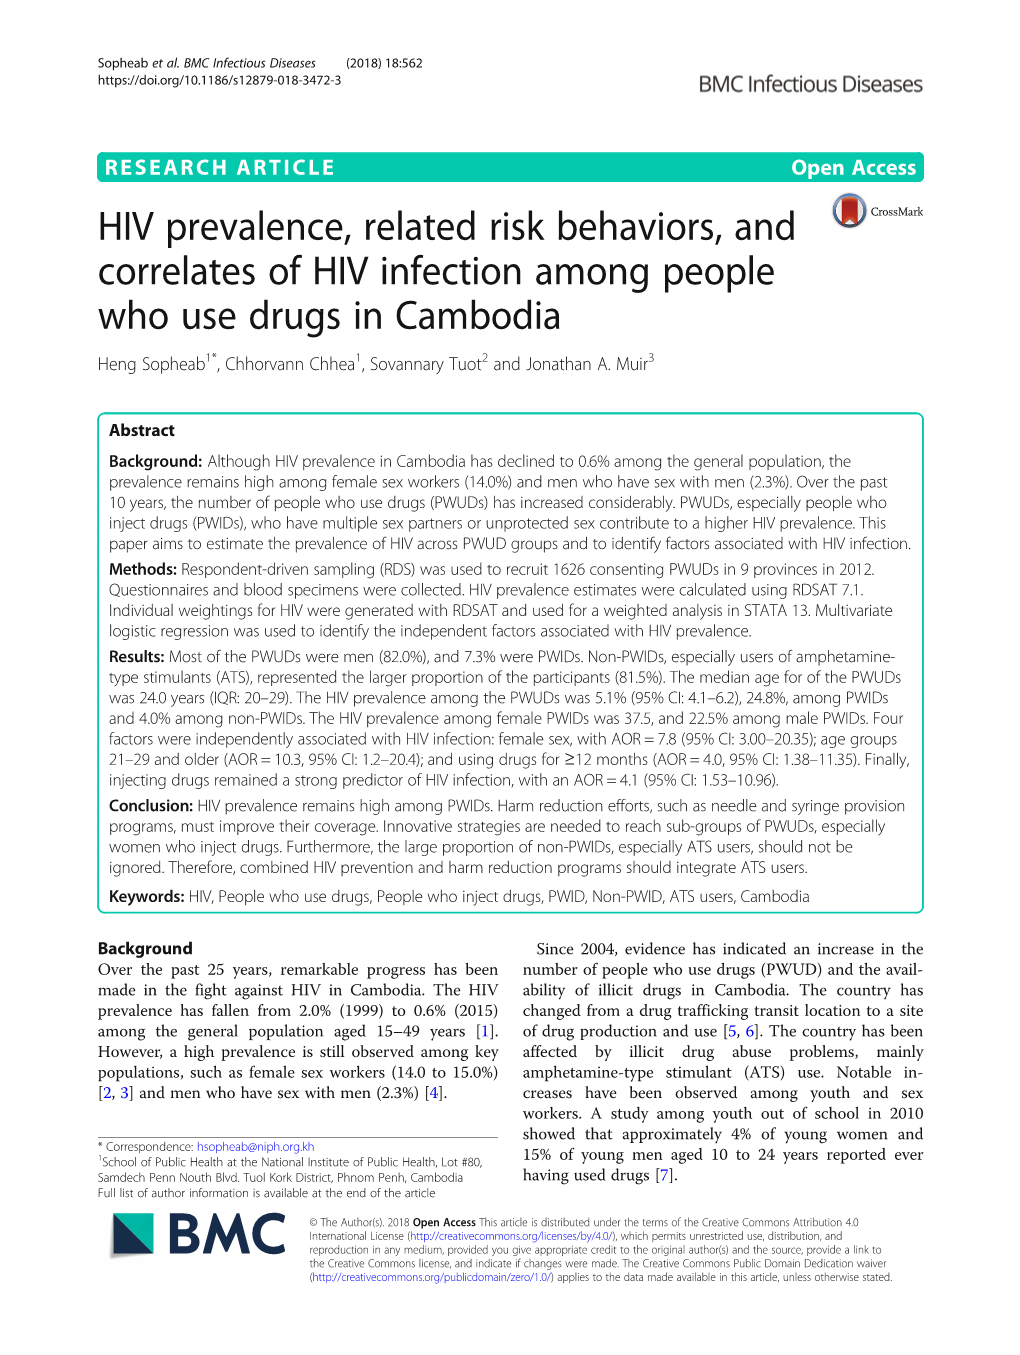 HIV Prevalence, Related Risk Behaviors, and Correlates of HIV Infection Among People Who Use Drugs in Cambodia